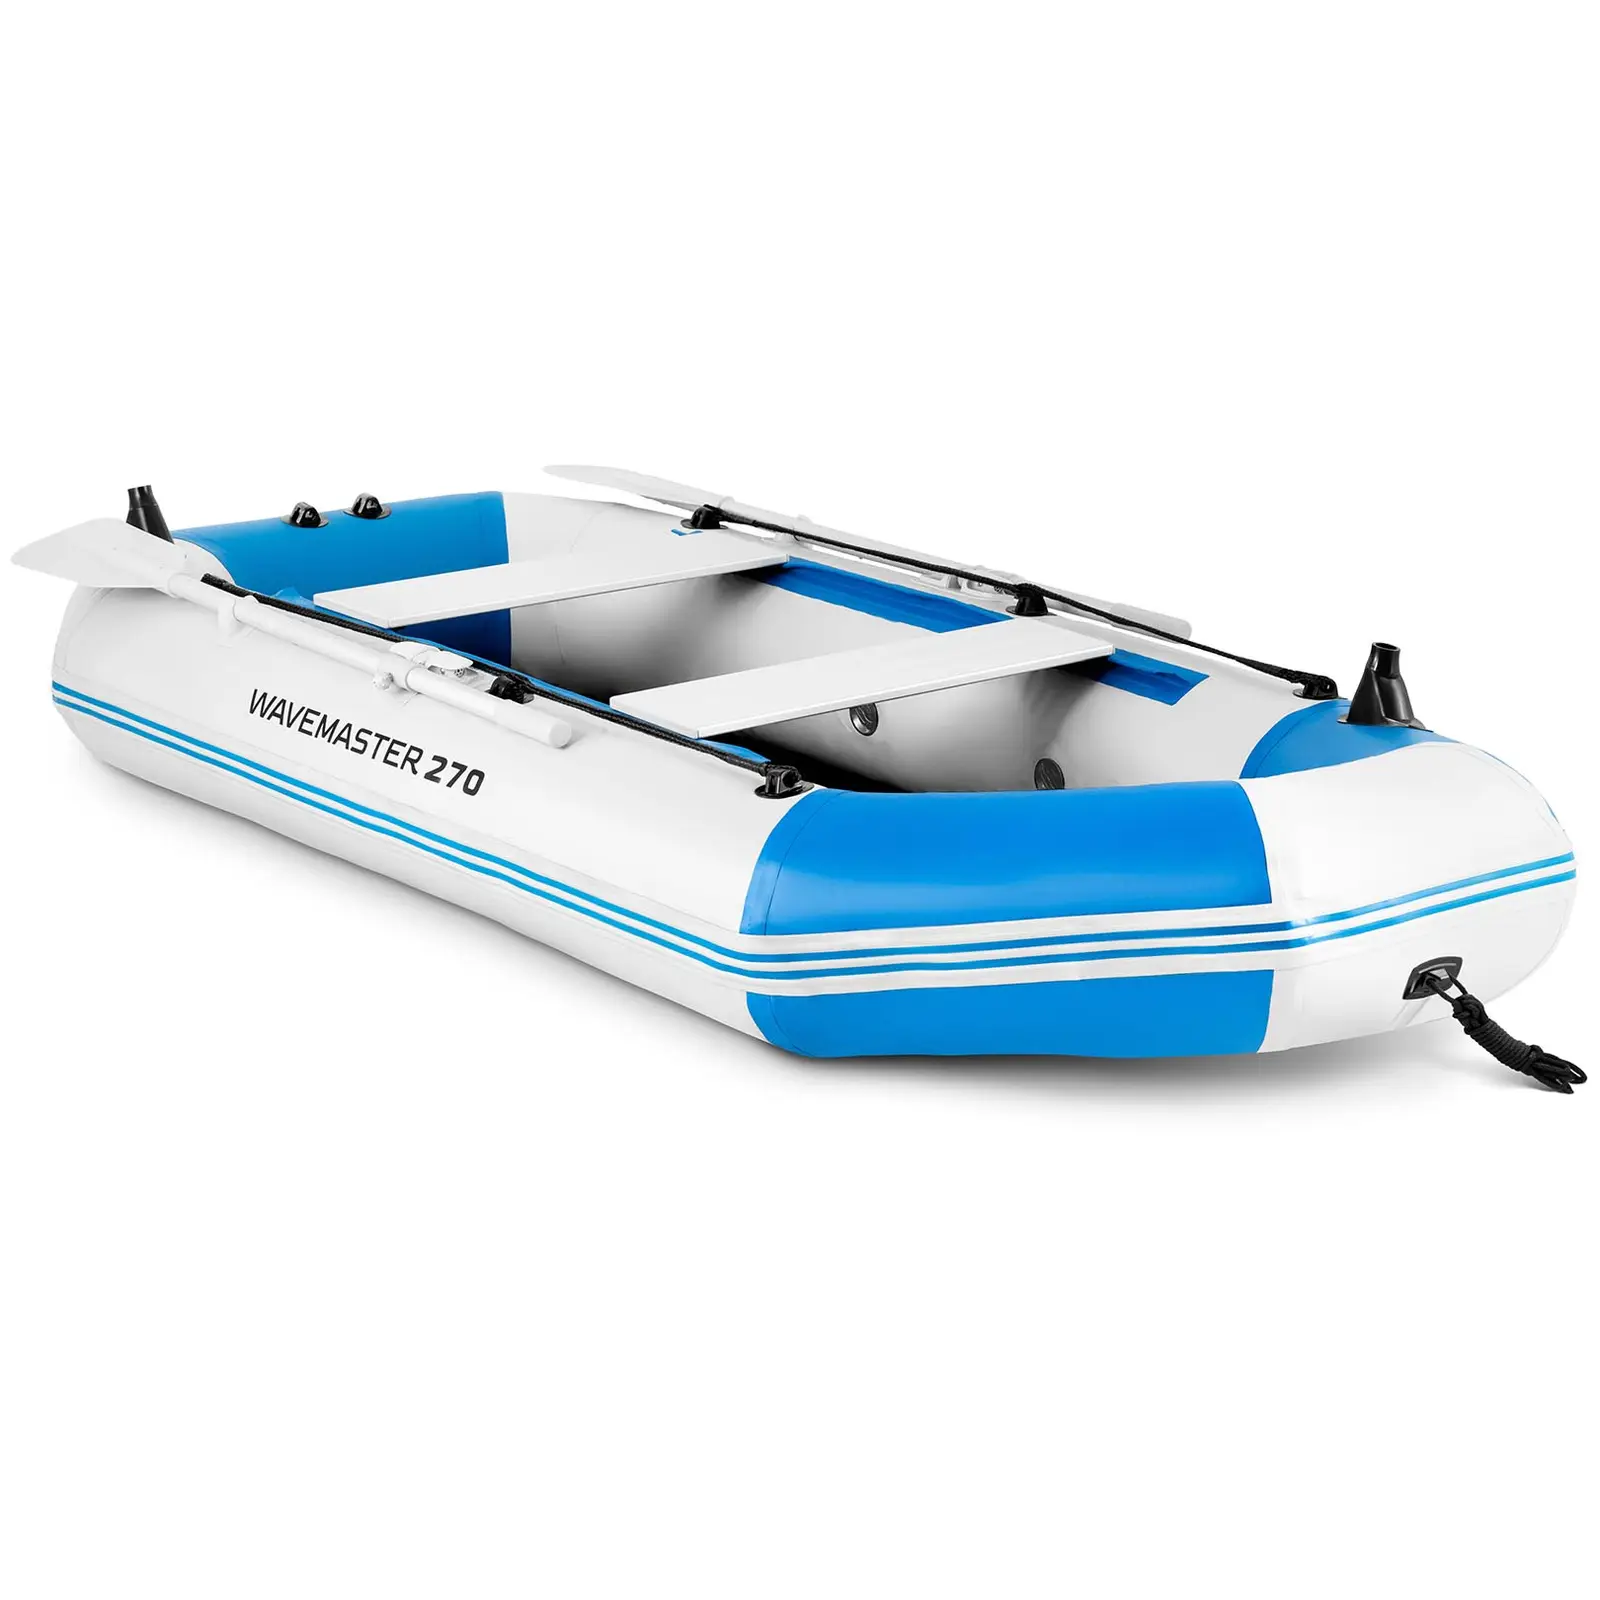 Inflatable Dinghy - Blue, White - 338 kg